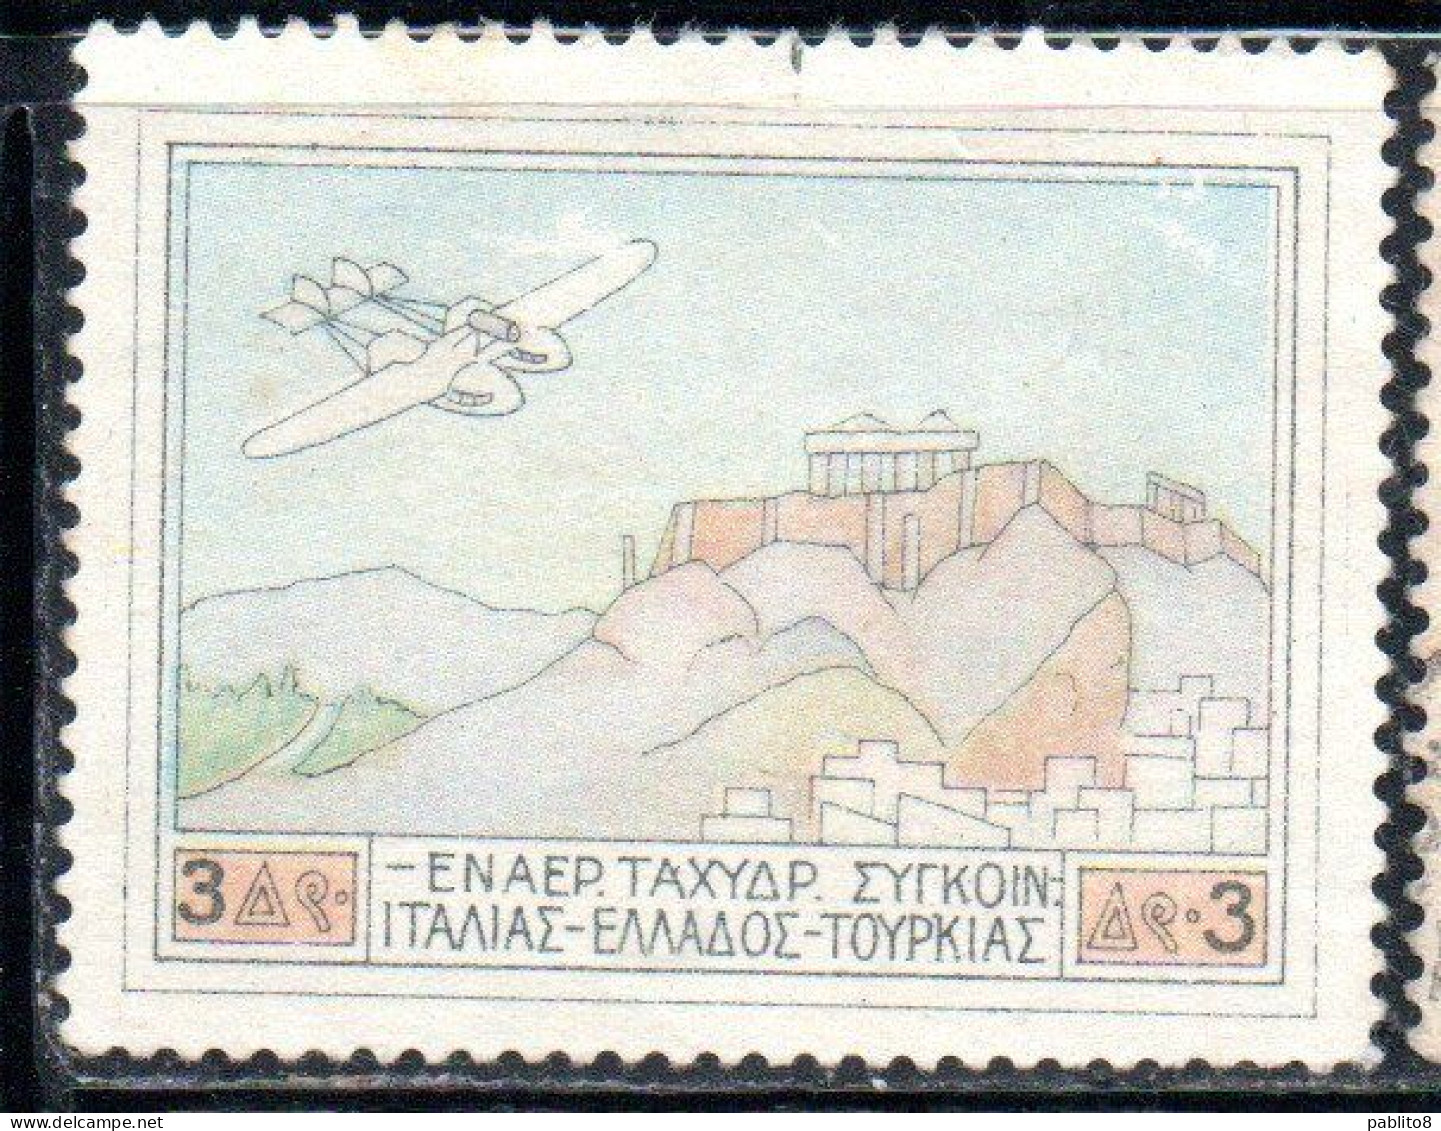 GREECE GRECIA ELLAS 1926 AIR POST MAIL AIRMAIL ITALY-TURKEY-RHODES SERVICE FLYING BOAT OVER ACROPOLIS 3d USED USATO - Used Stamps